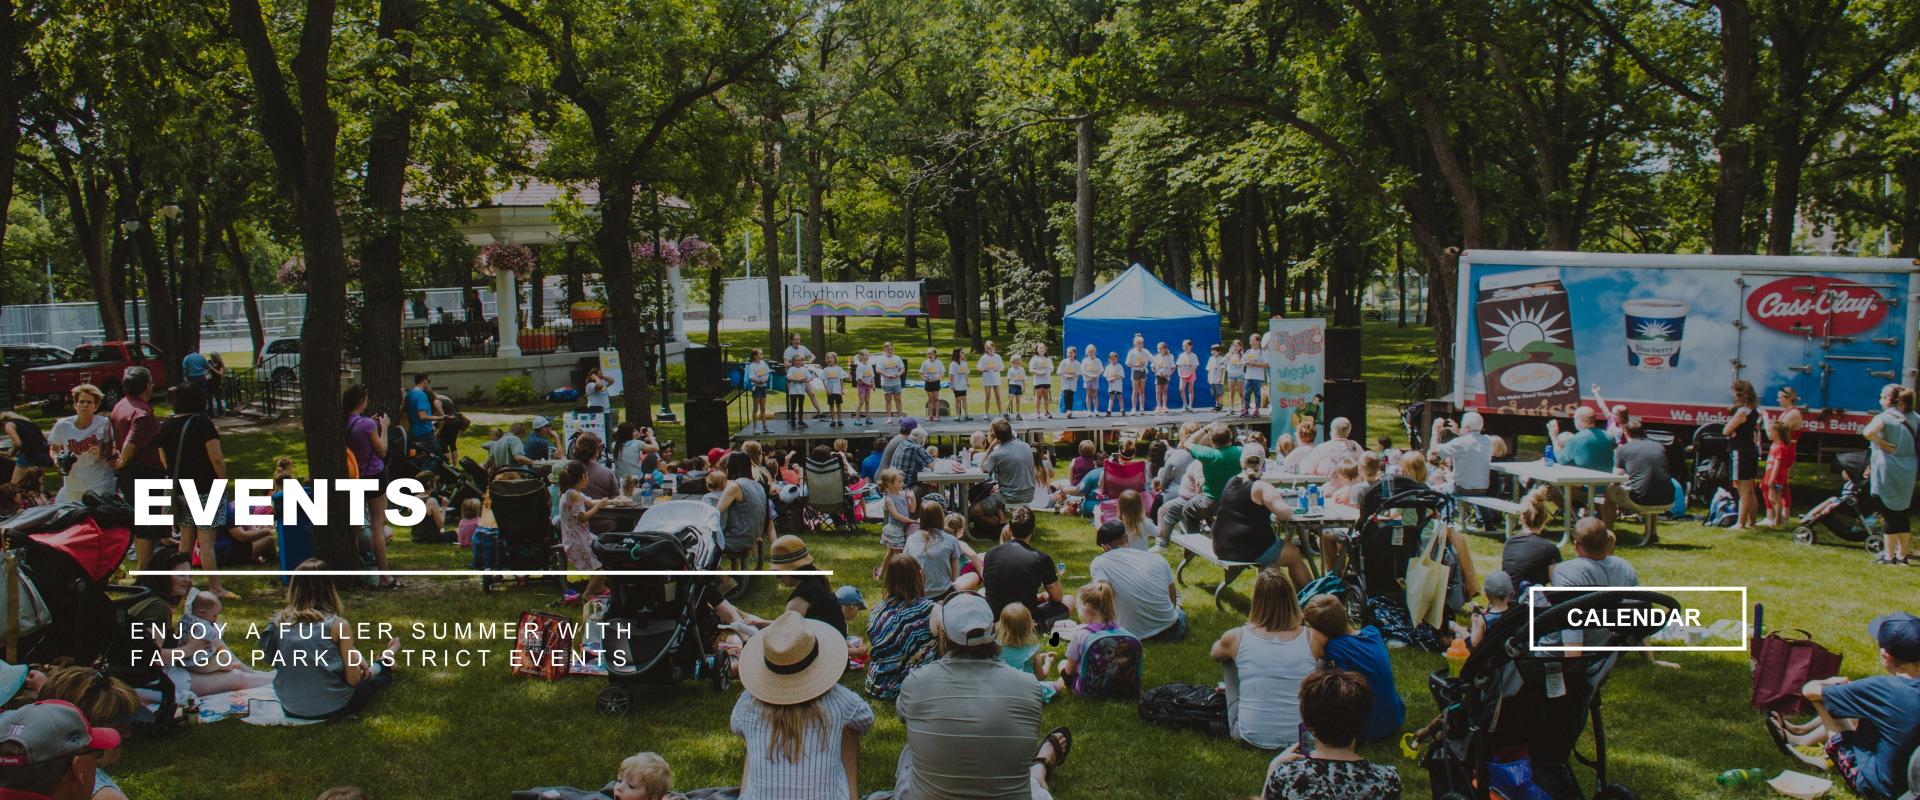 EVENTS - Enjoy a fuller summer with Fargo Park District Events - image of kids on a stage at Midwest Kid Fest in Island Park at a Penny & Pals show surrounded by hundreds of people sitting on the lawn listening